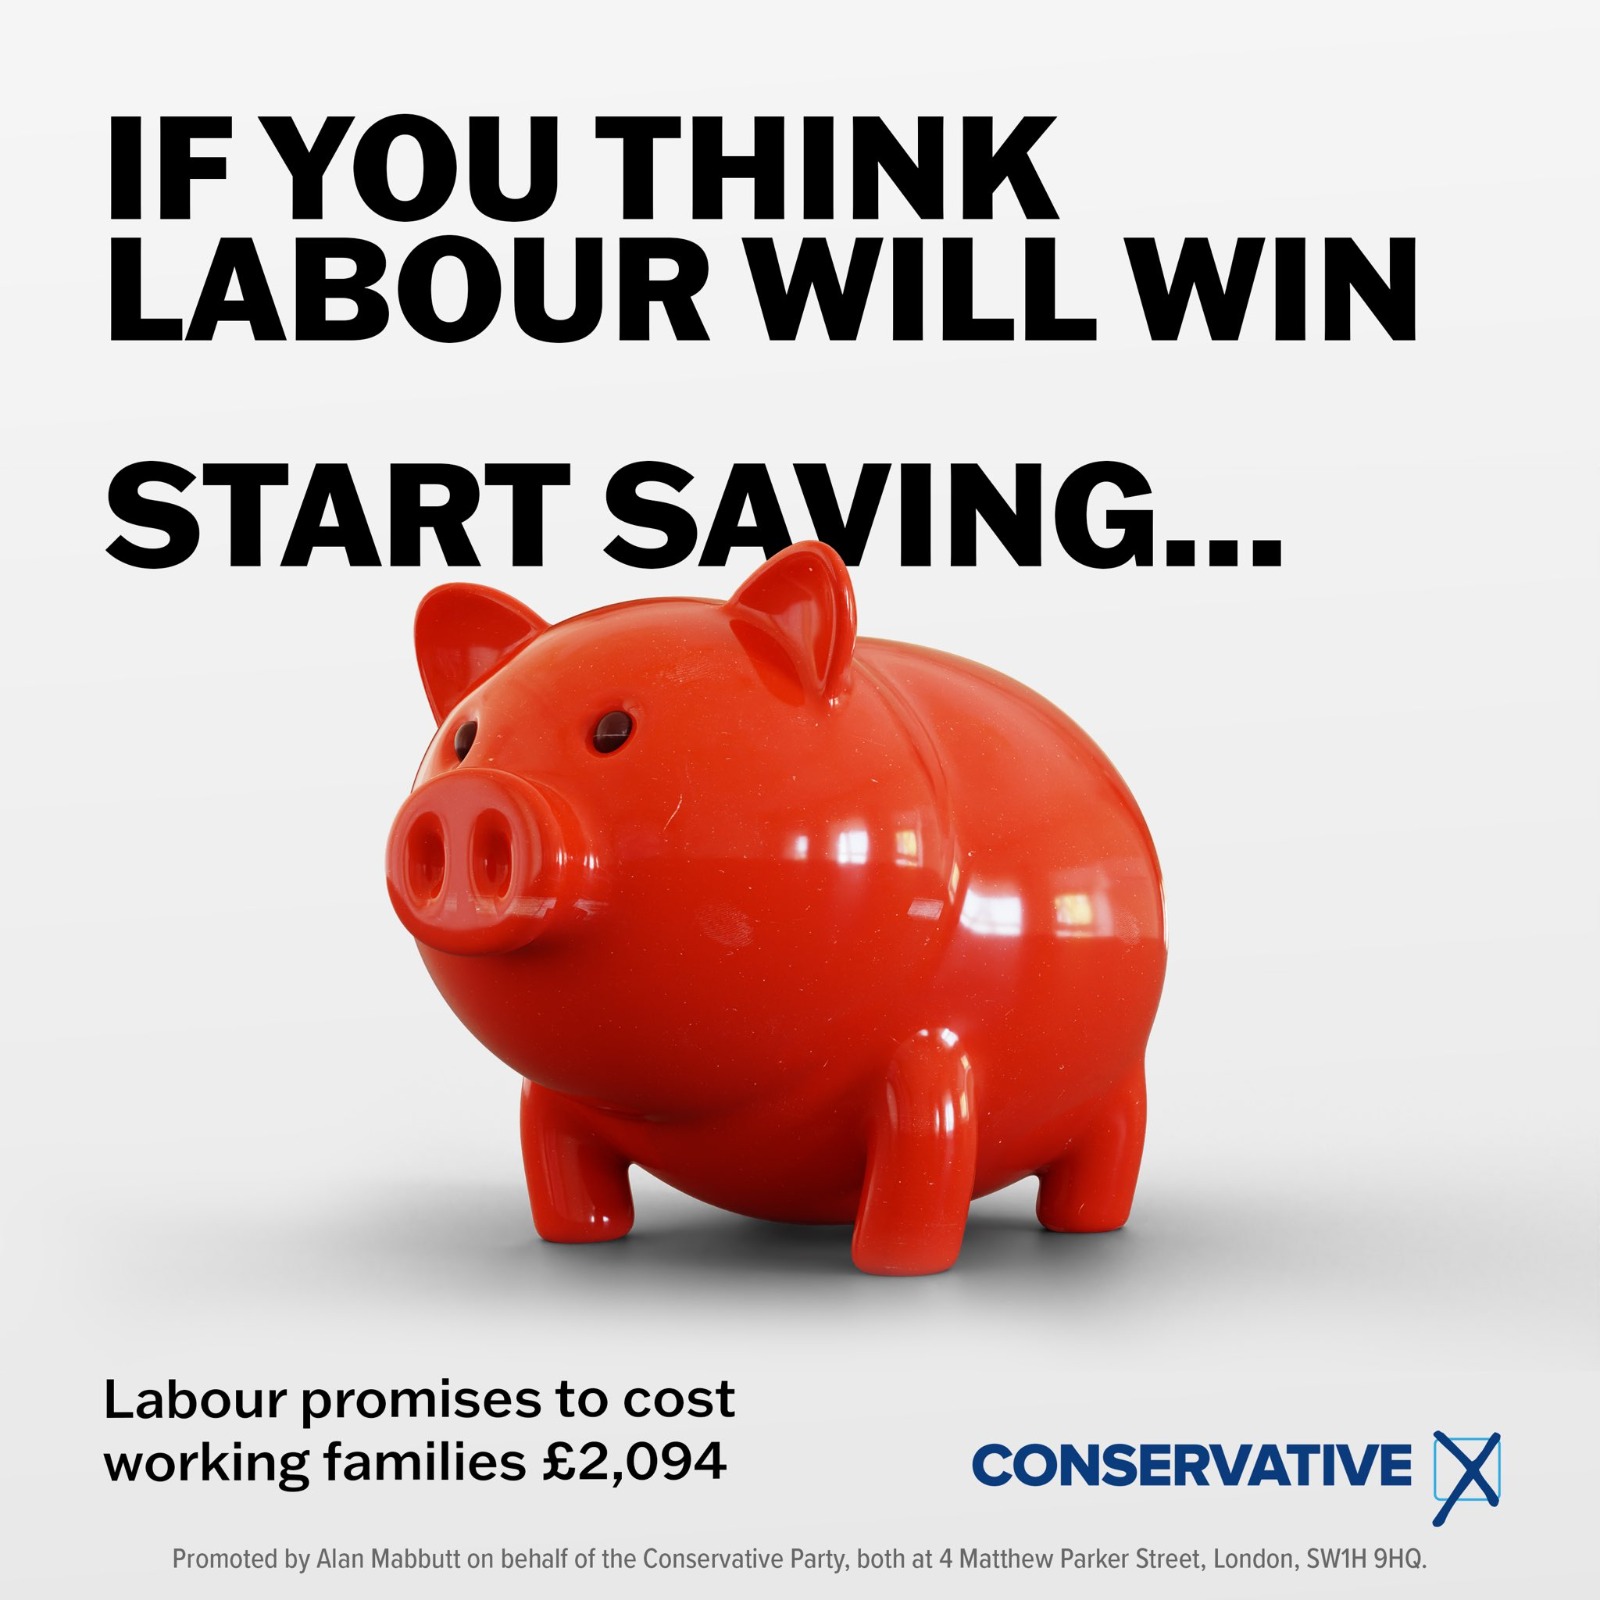 If you think Labour will win, start saving